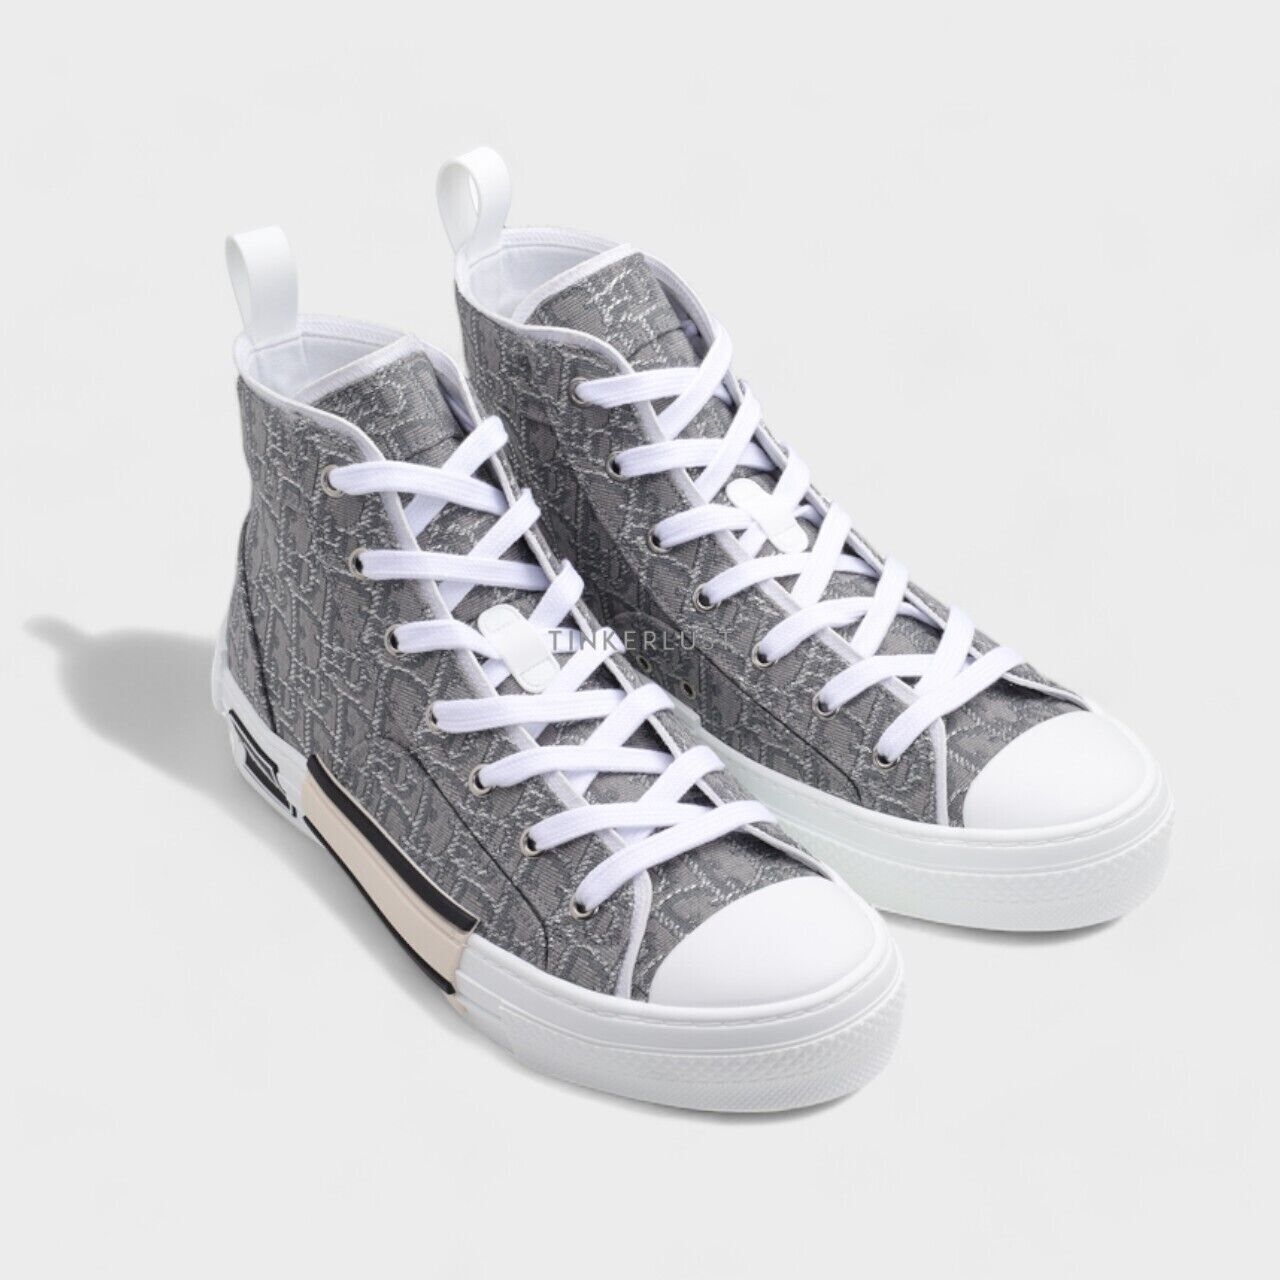 Christian Dior B23 Oblique in Ruthenium-Colored High Top Sneakers